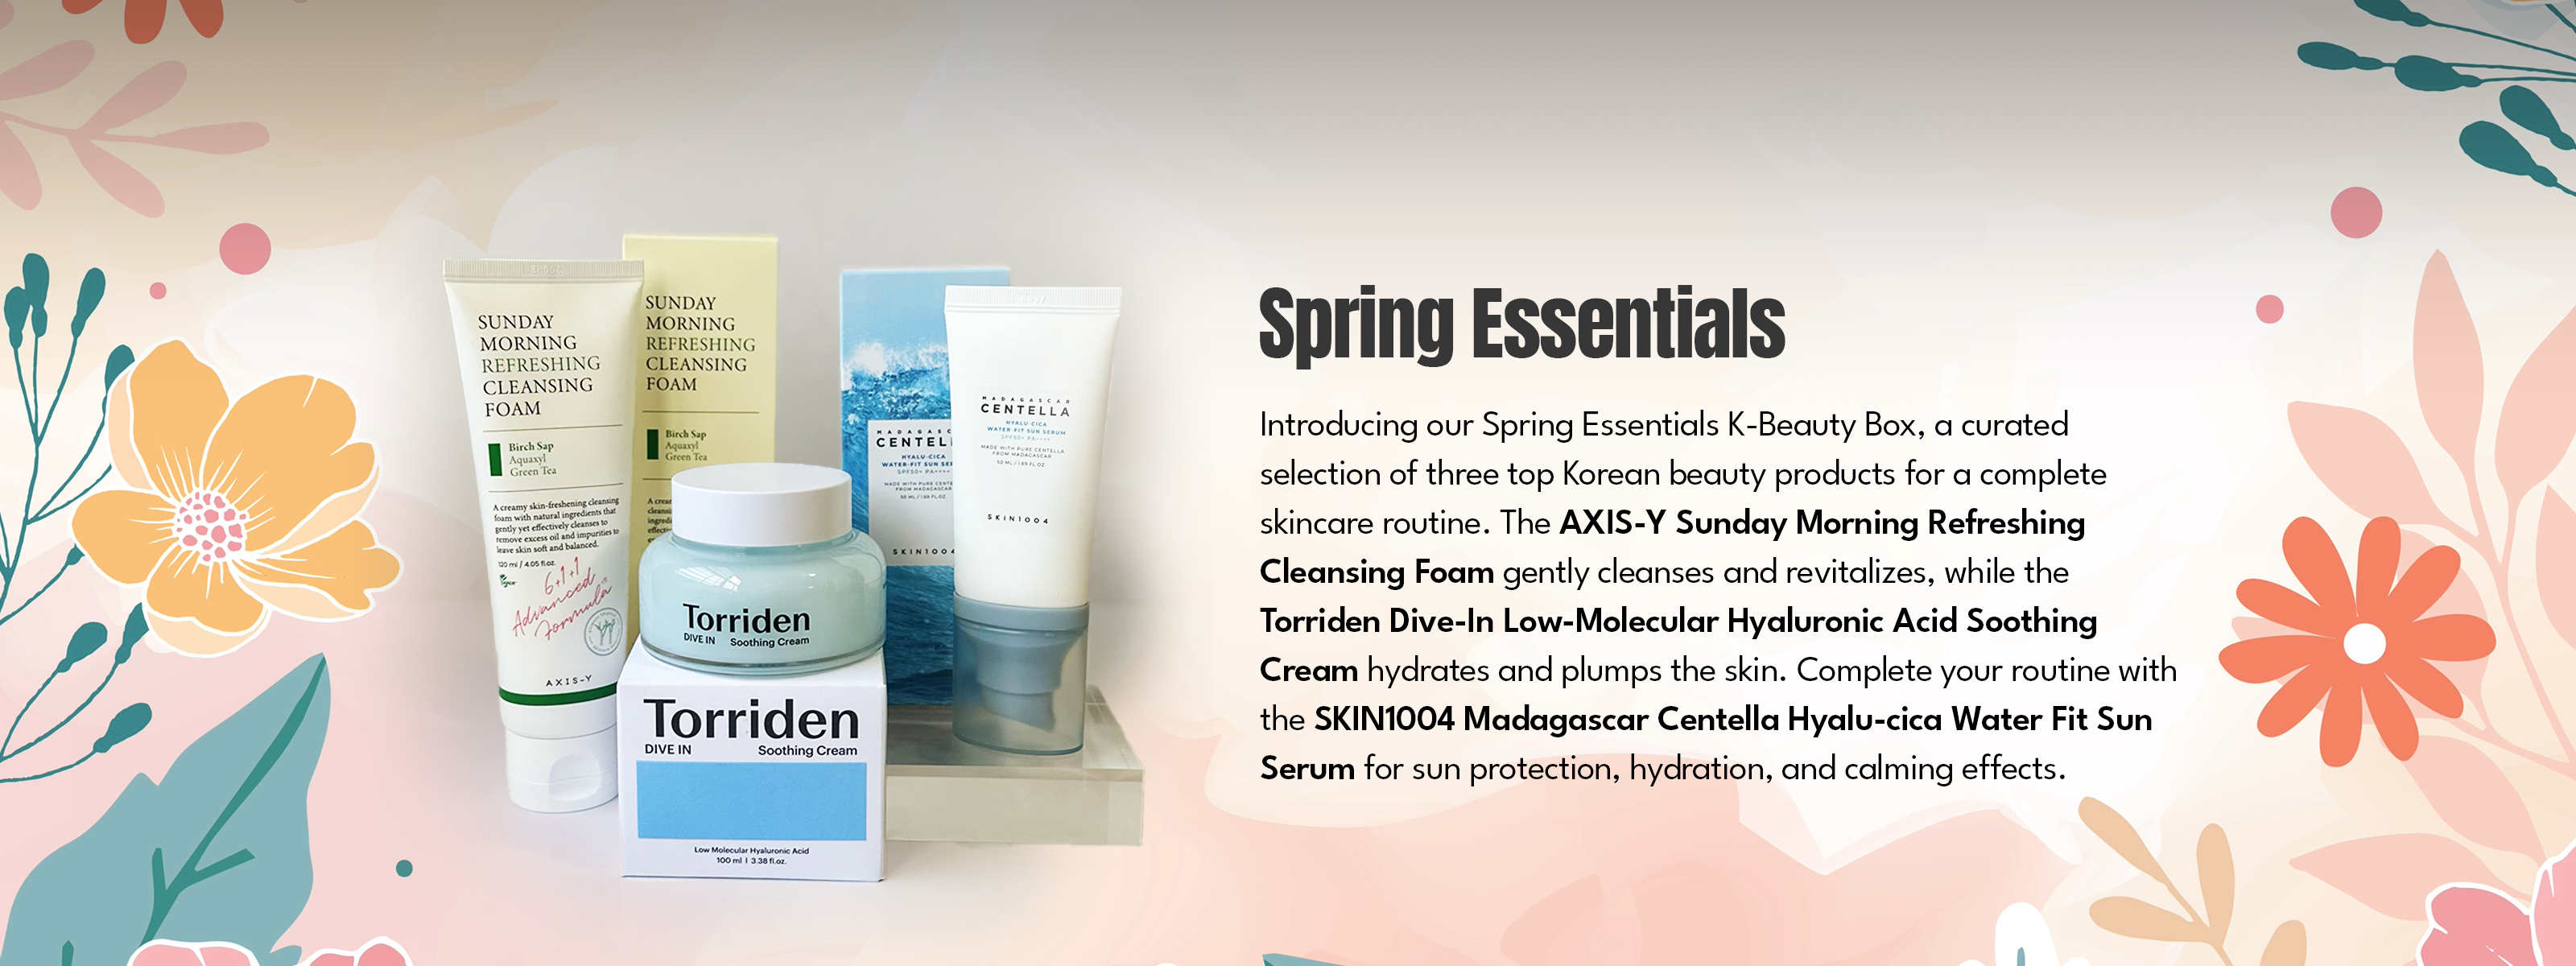 Spring Essentials Box with Torriden, AXIS-Y, and SKIN1004 products.